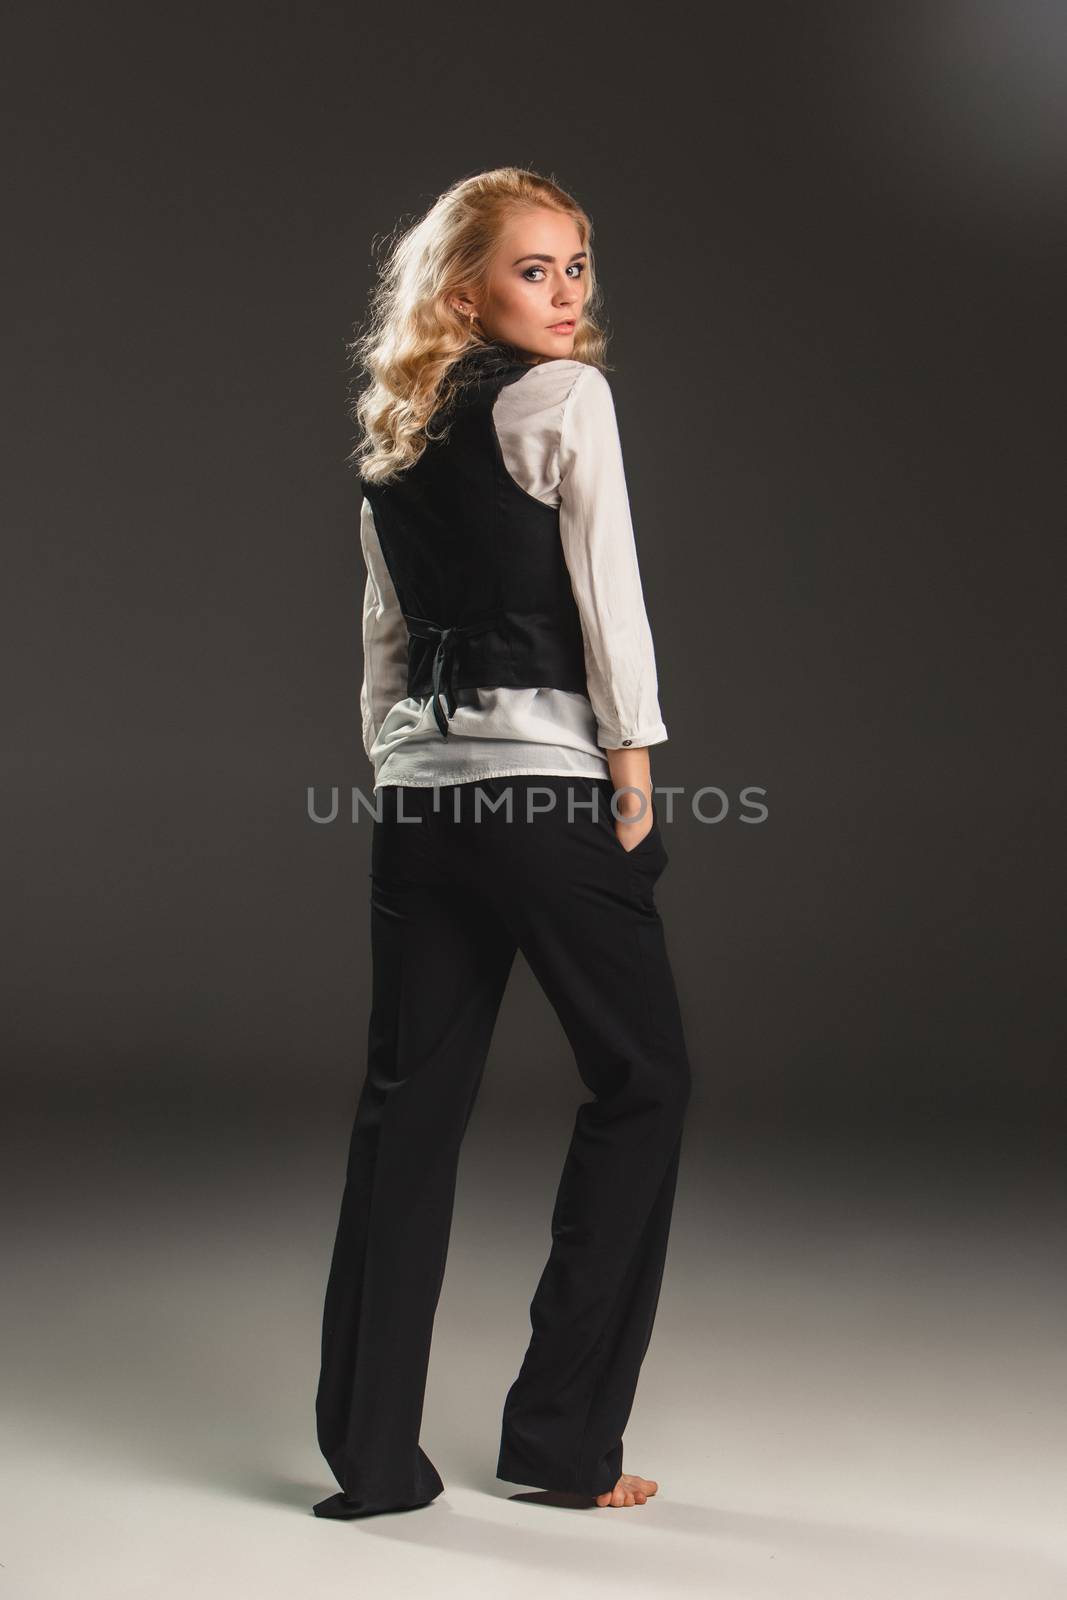 Beauty blond woman  in a black suit and white shirt on a gray background. Portrait in full growth